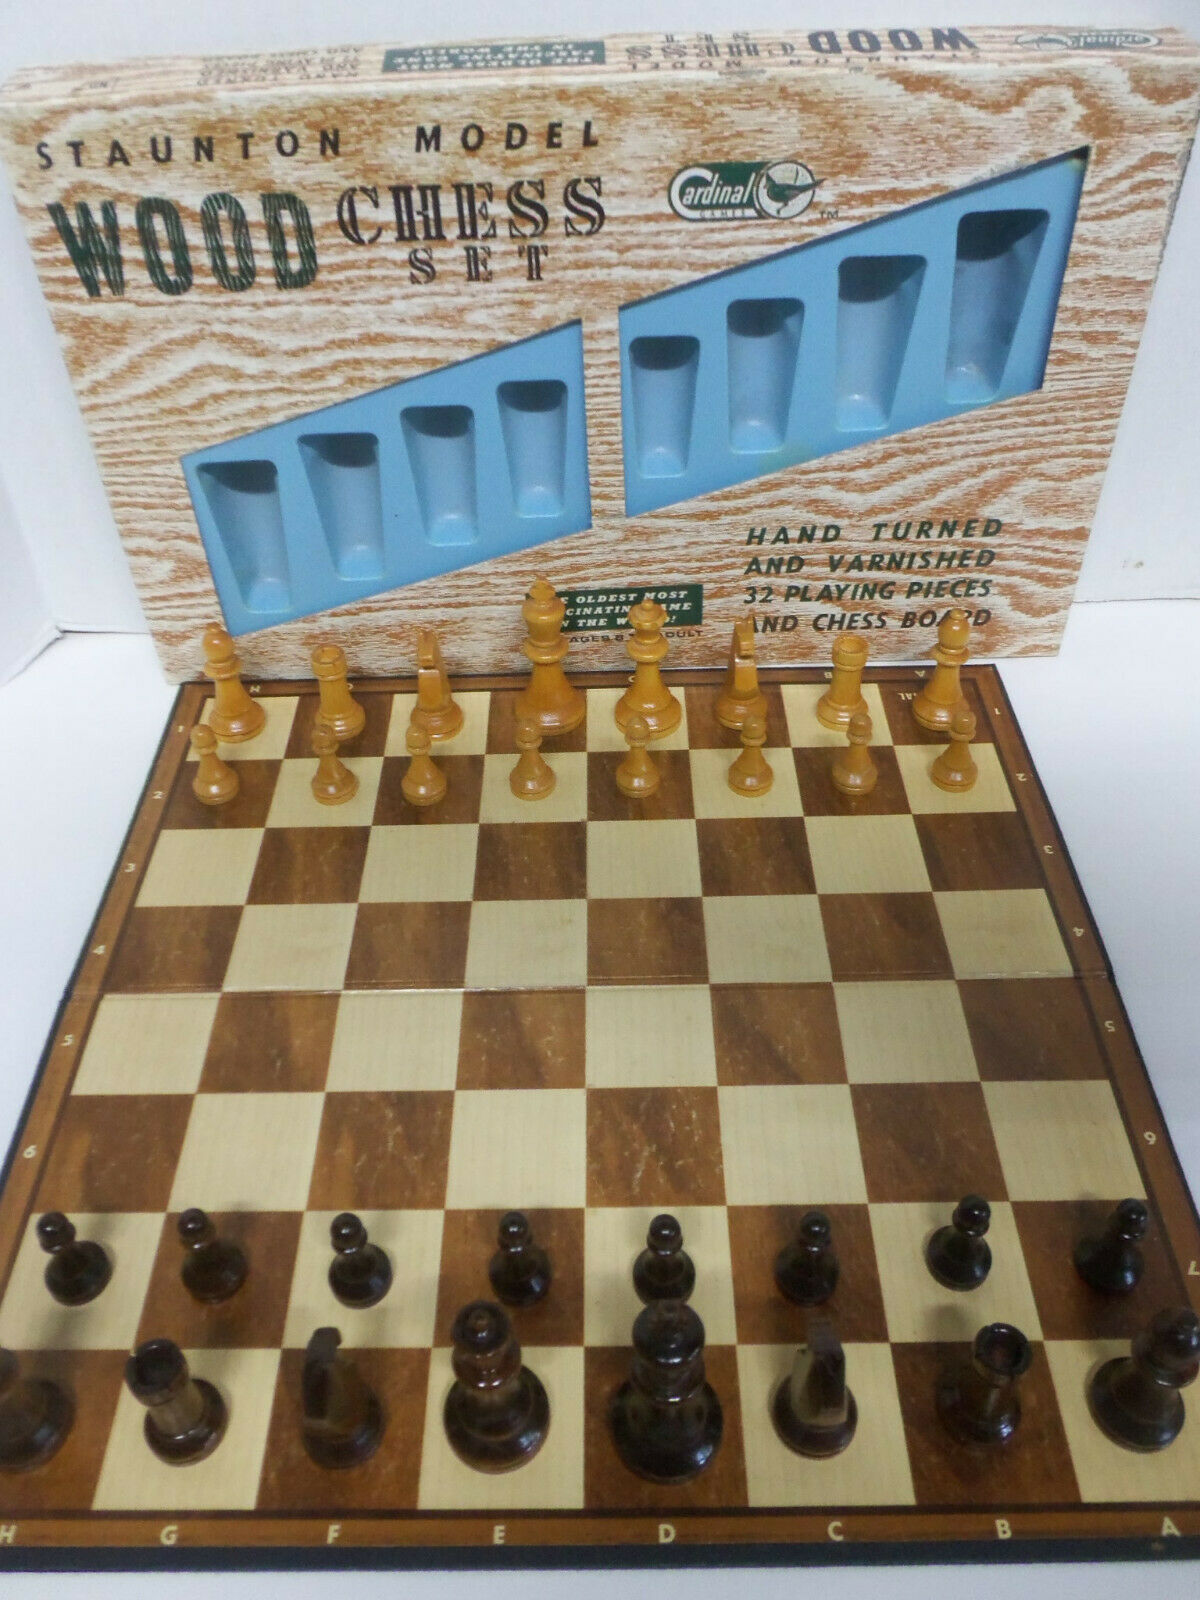 RARE Vintage Staunton Model Wood Chess Set by Cardinal Games COMPLETE in Box - $69.25